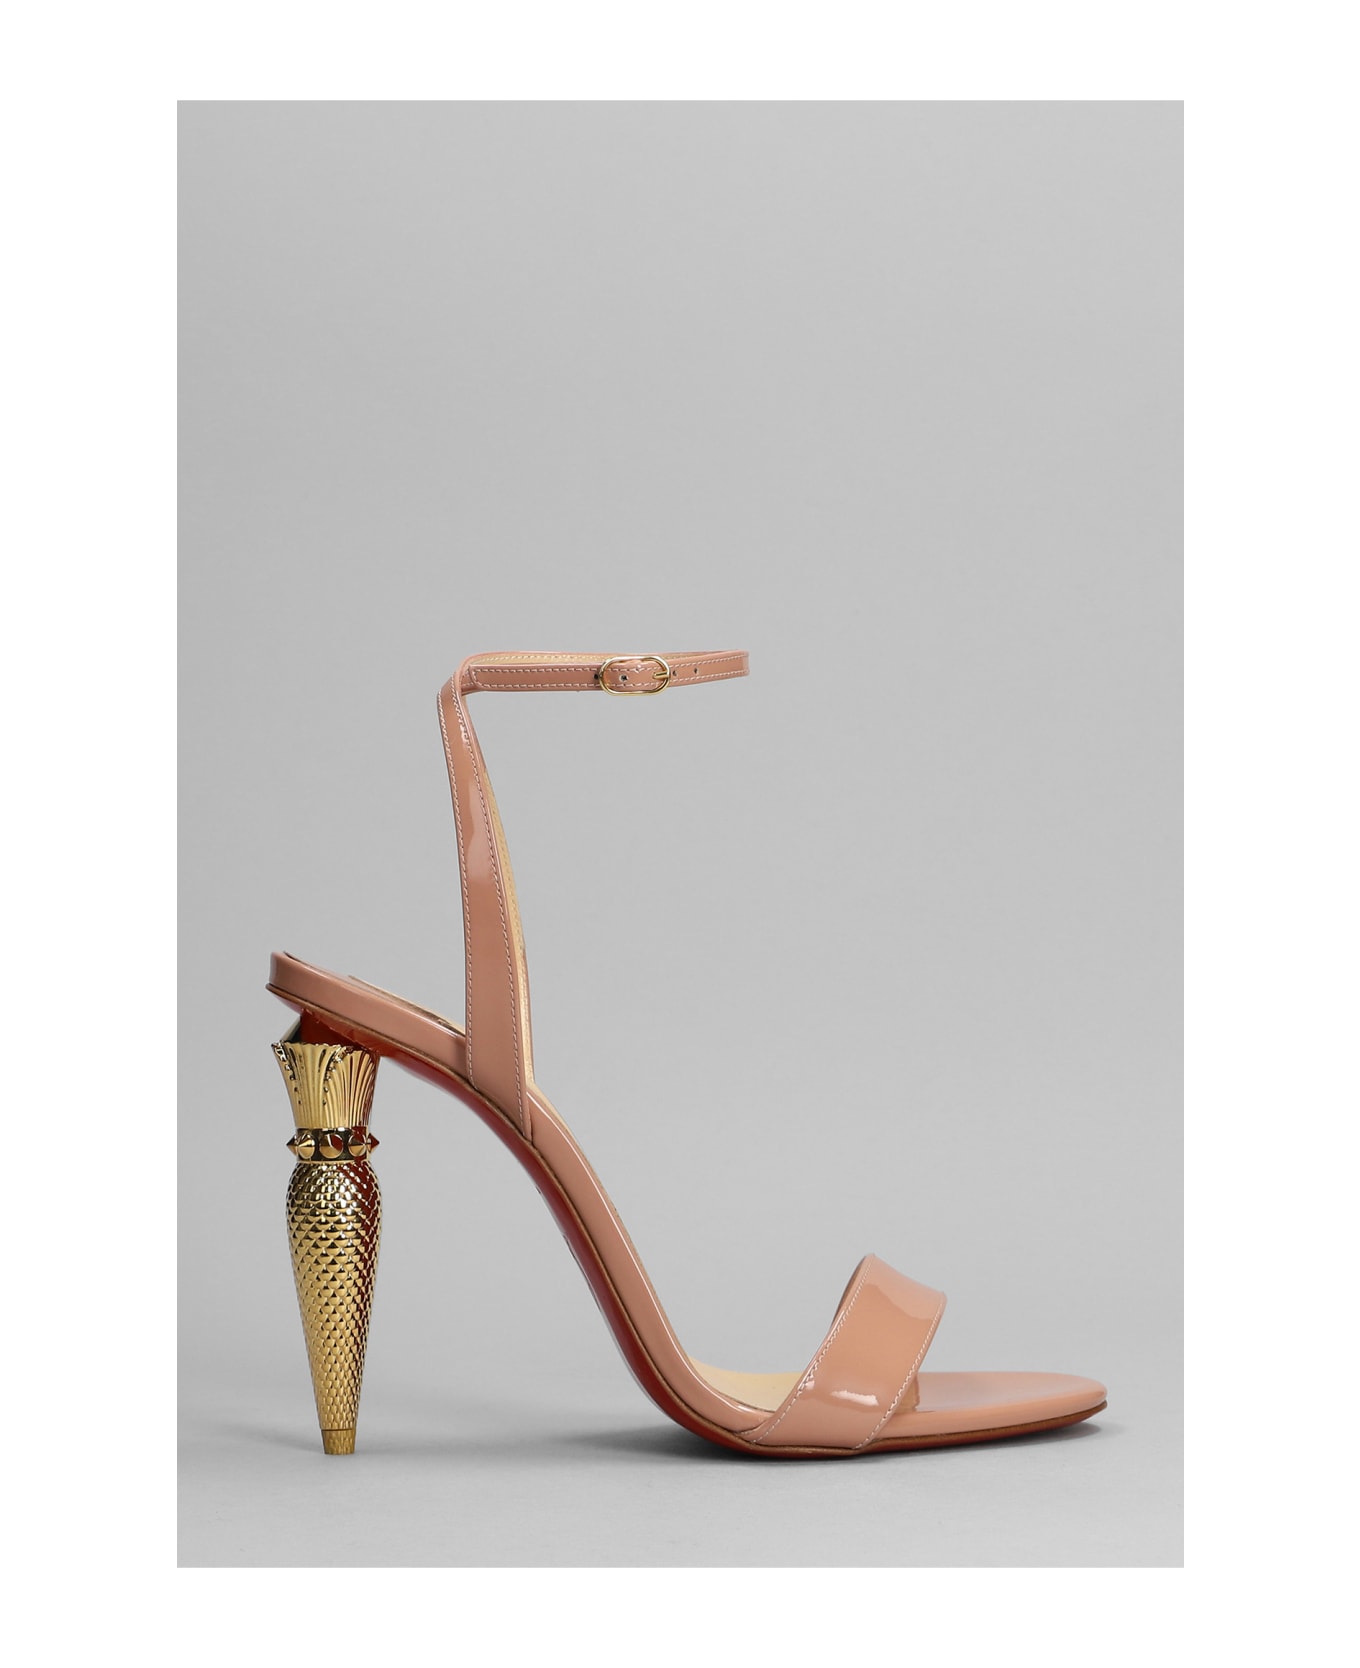 Christian Louboutin Lipqueen 100 Sandals In Rose-pink Patent Leather - rose-pink